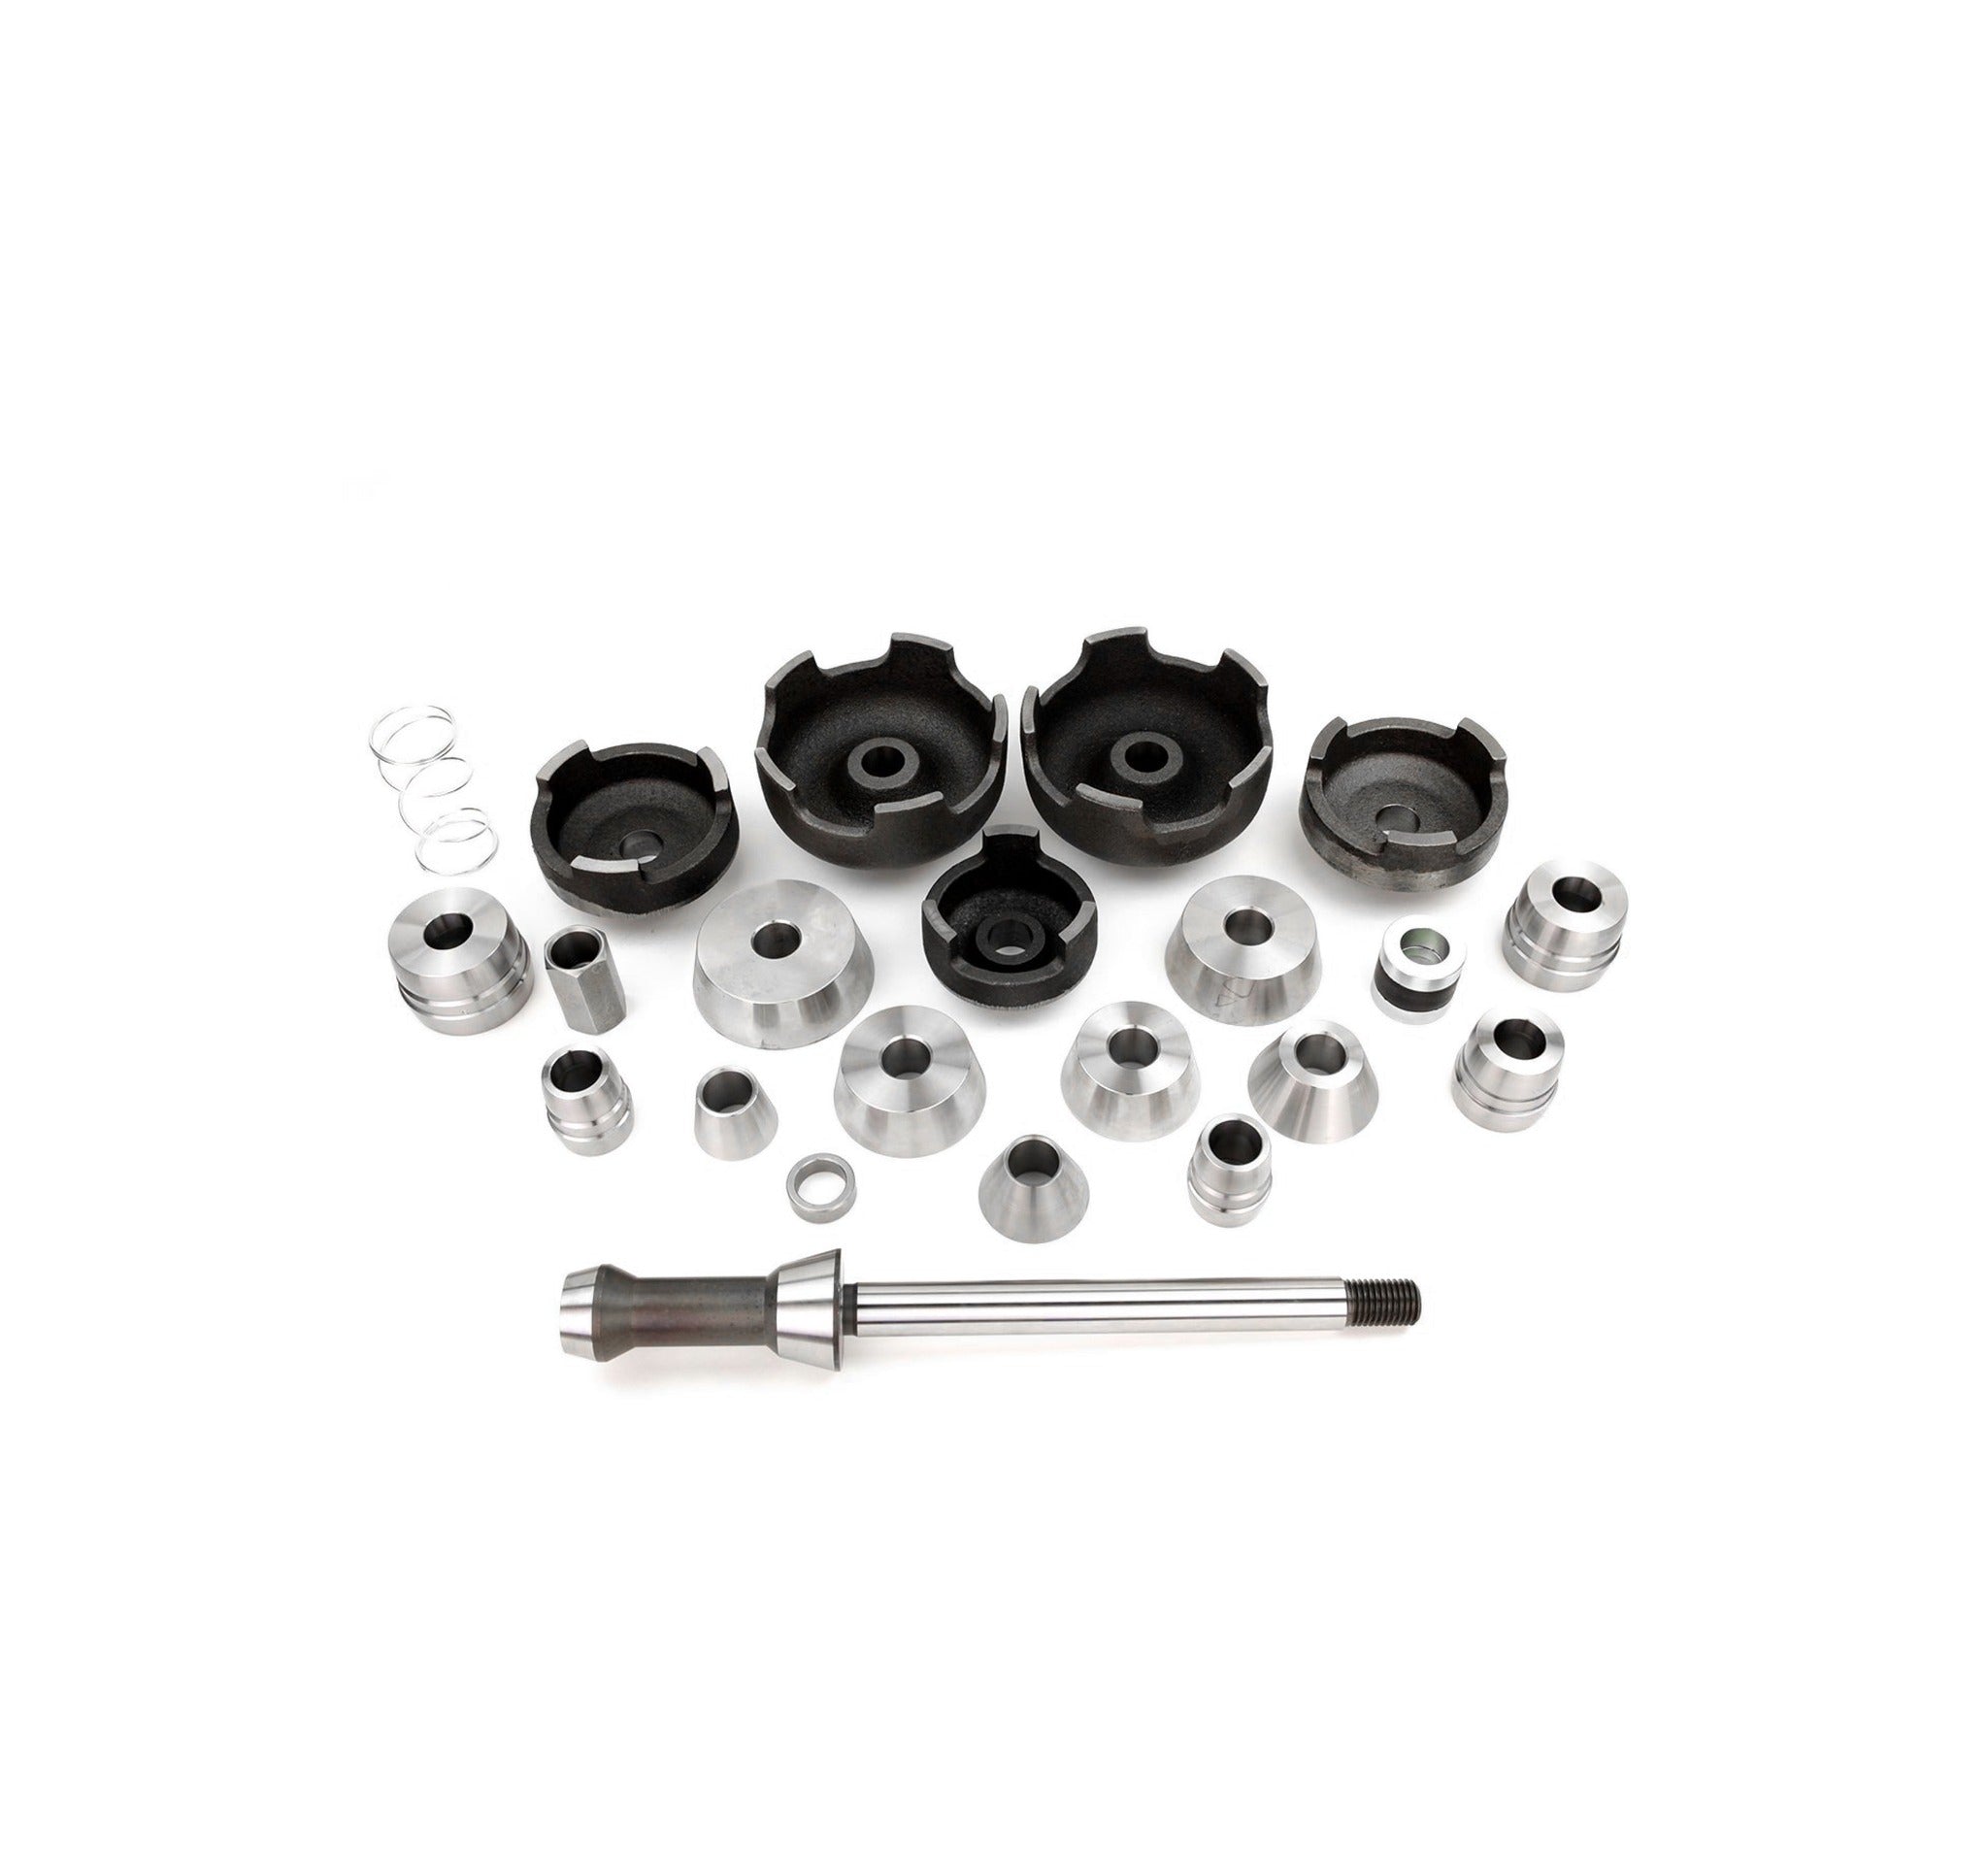 22 pcs adapter Set with 1" Bore Ammco